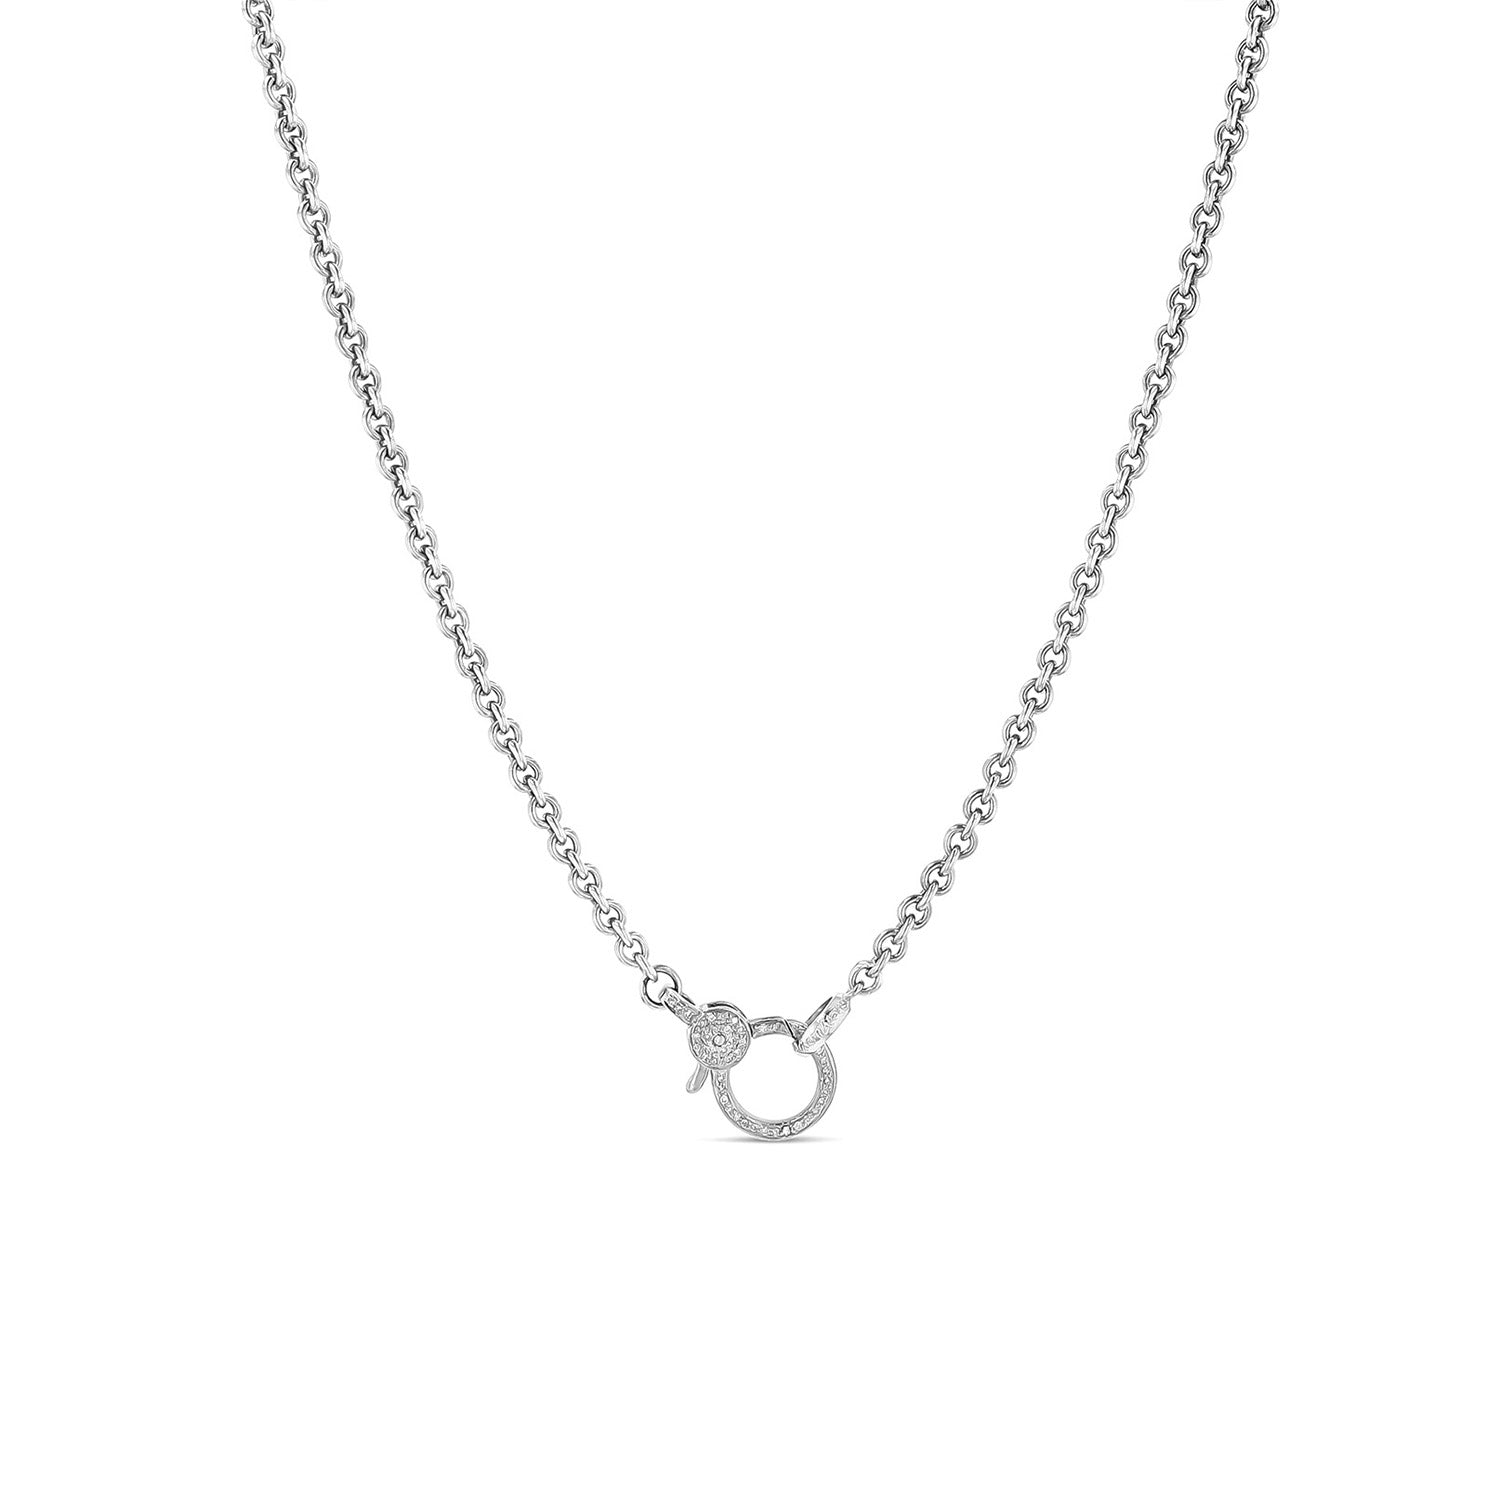 Short Cable Chain Necklace with Diamond Claw Clasp - 17" NB000384 - TBird